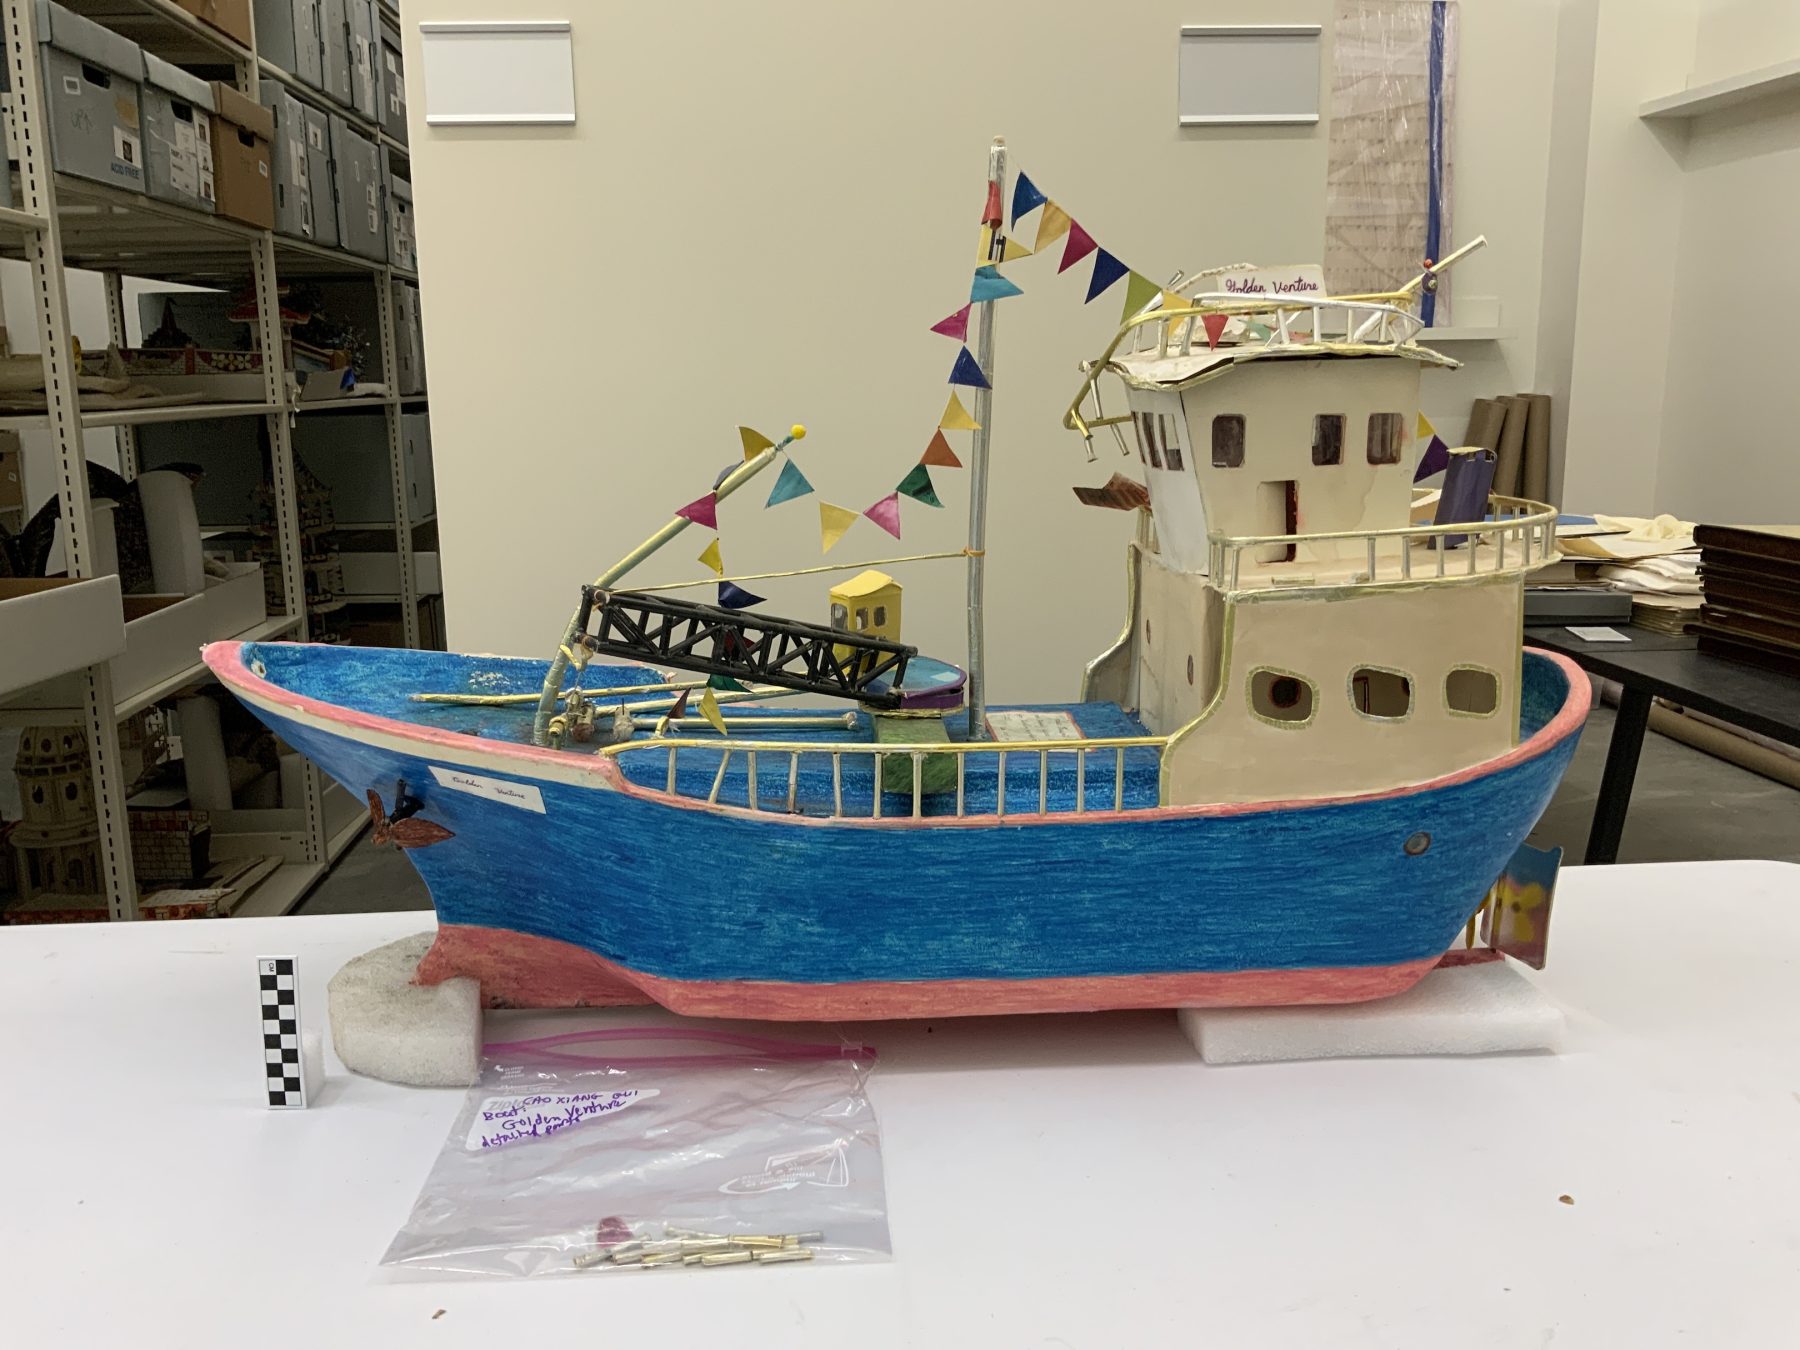 1996.061 Paper sculpture of the Golden Venture Ship made by one of the refugees detained after this vessel ran aground at Rockaway Beach, Queens in 1993. Paper-mache and colored marker, 1993-1996. Museum of Chinese in America (MOCA) Fly to Freedom Collection.